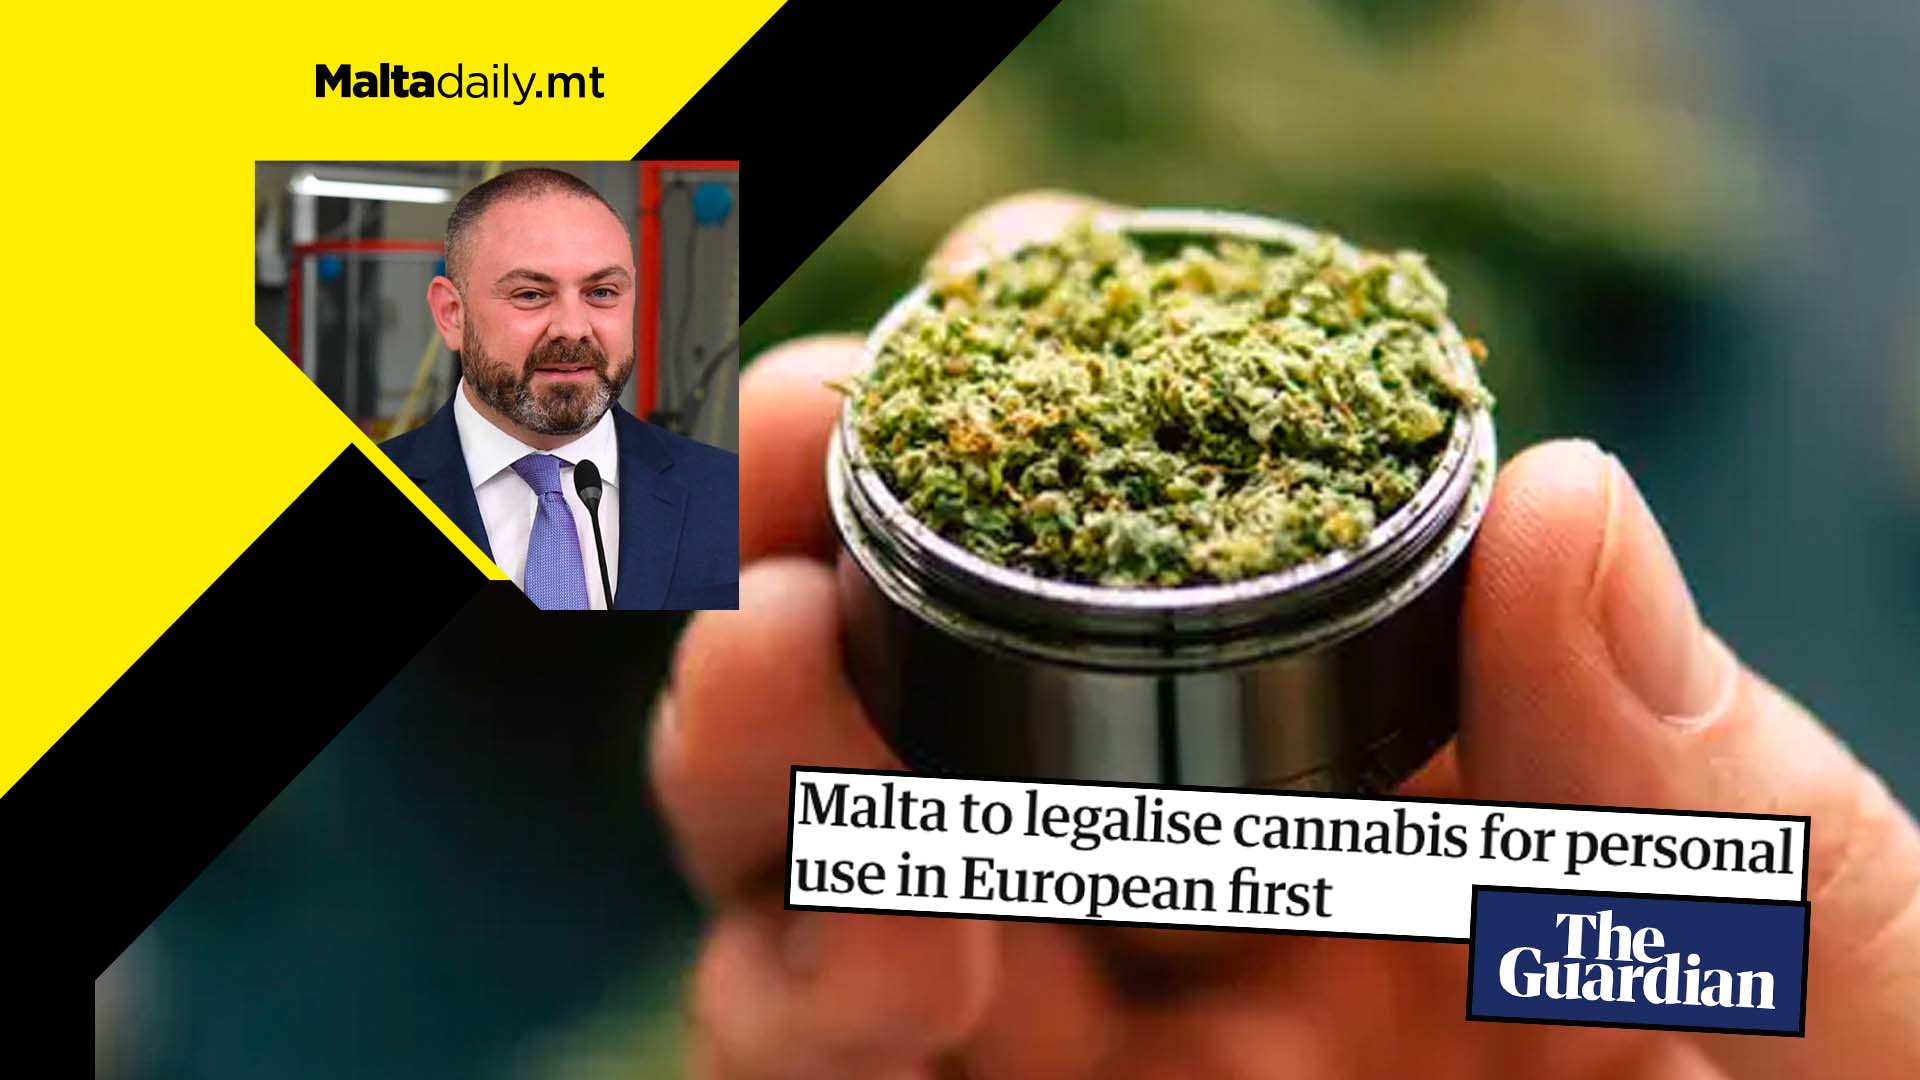 Cannabis could be made legal today in Malta in European first